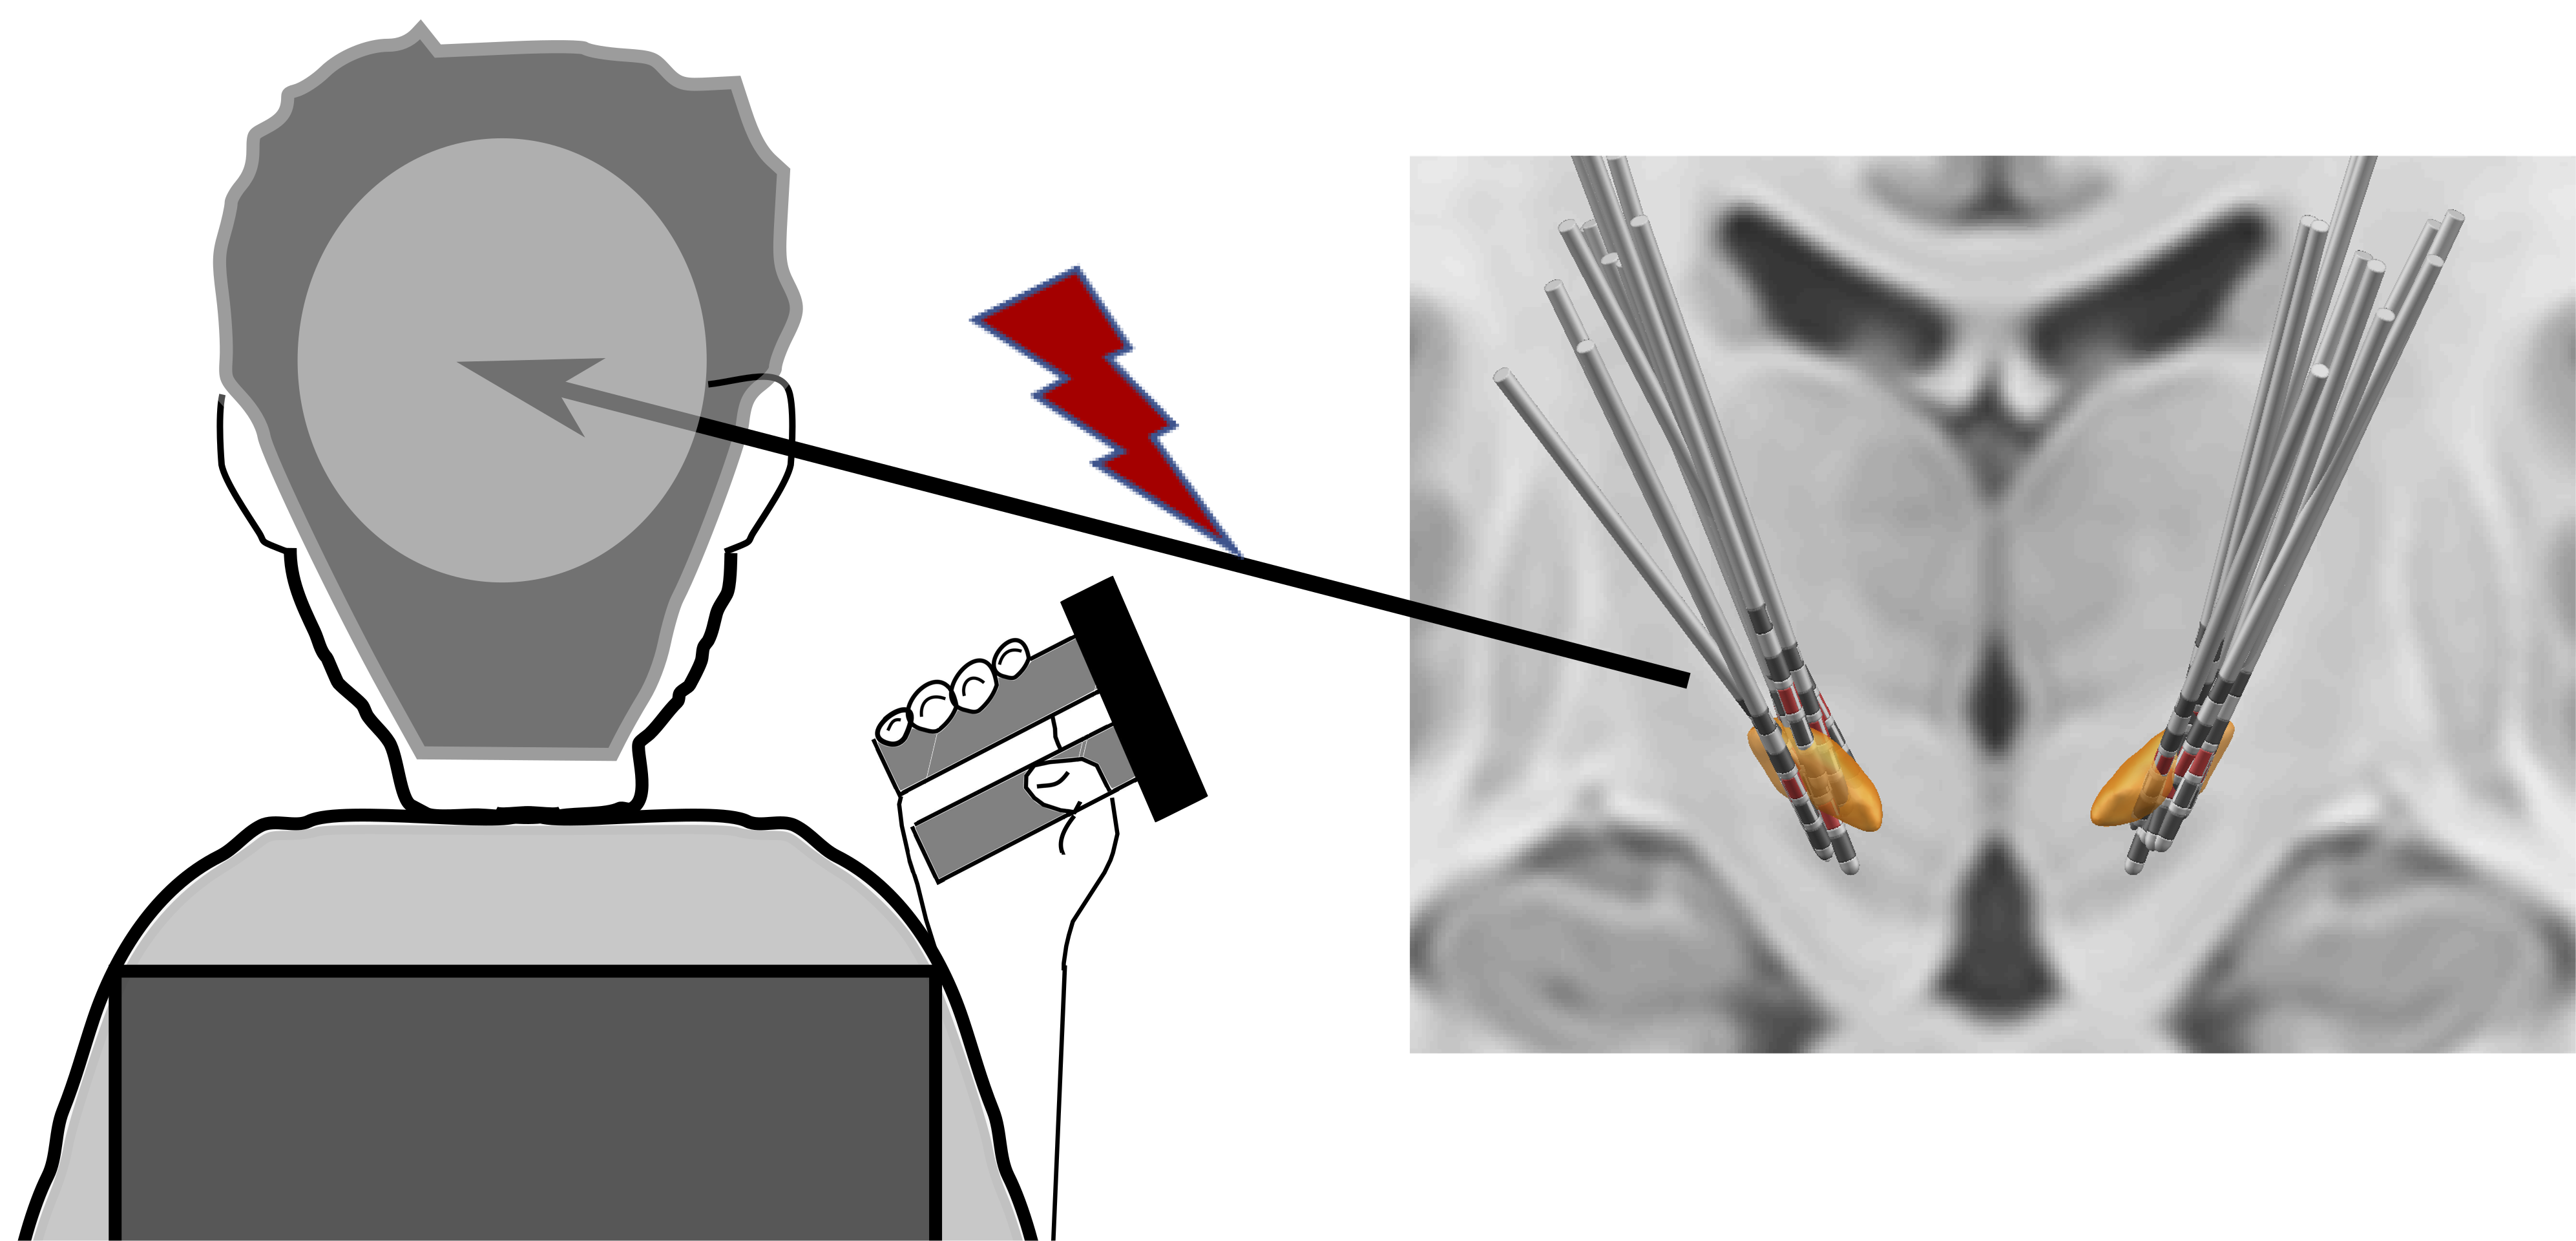 Left, schematic of person holding a force gripper in their hand; Right, schematic of electrodes implanted in deep brain structures